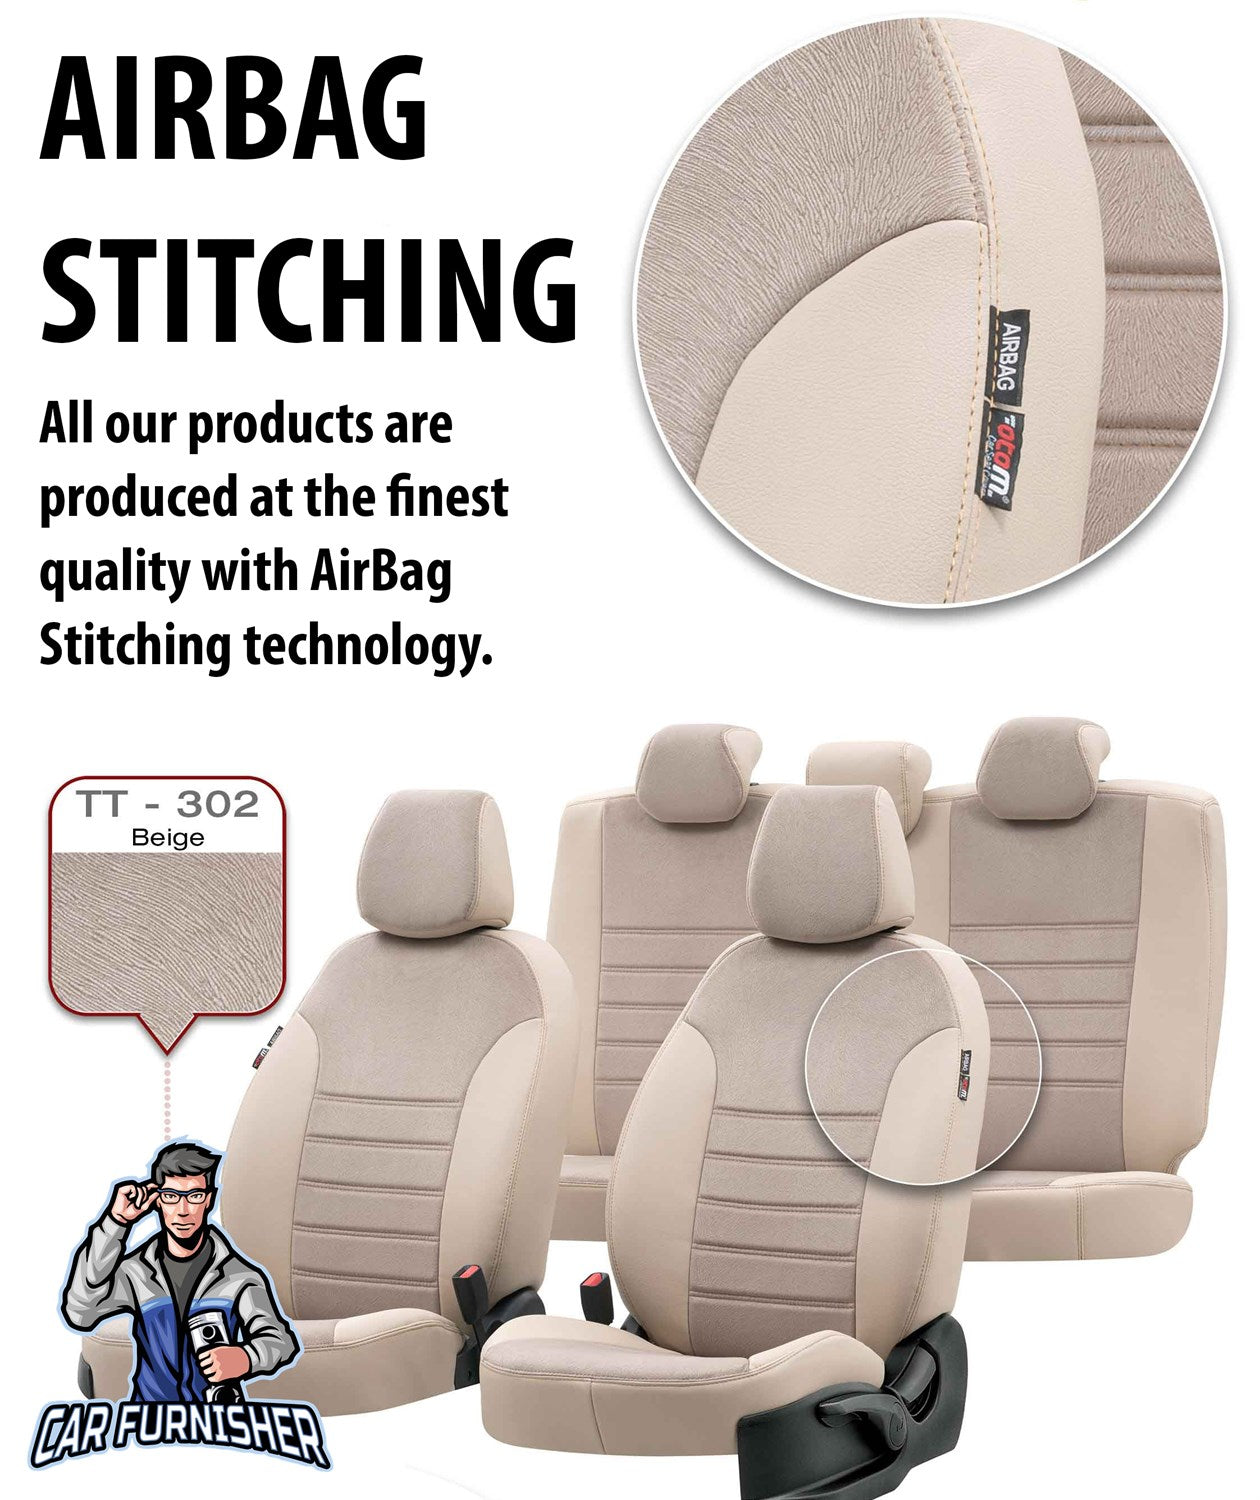 Fiat Fullback Seat Covers London Foal Feather Design Beige Leather & Foal Feather